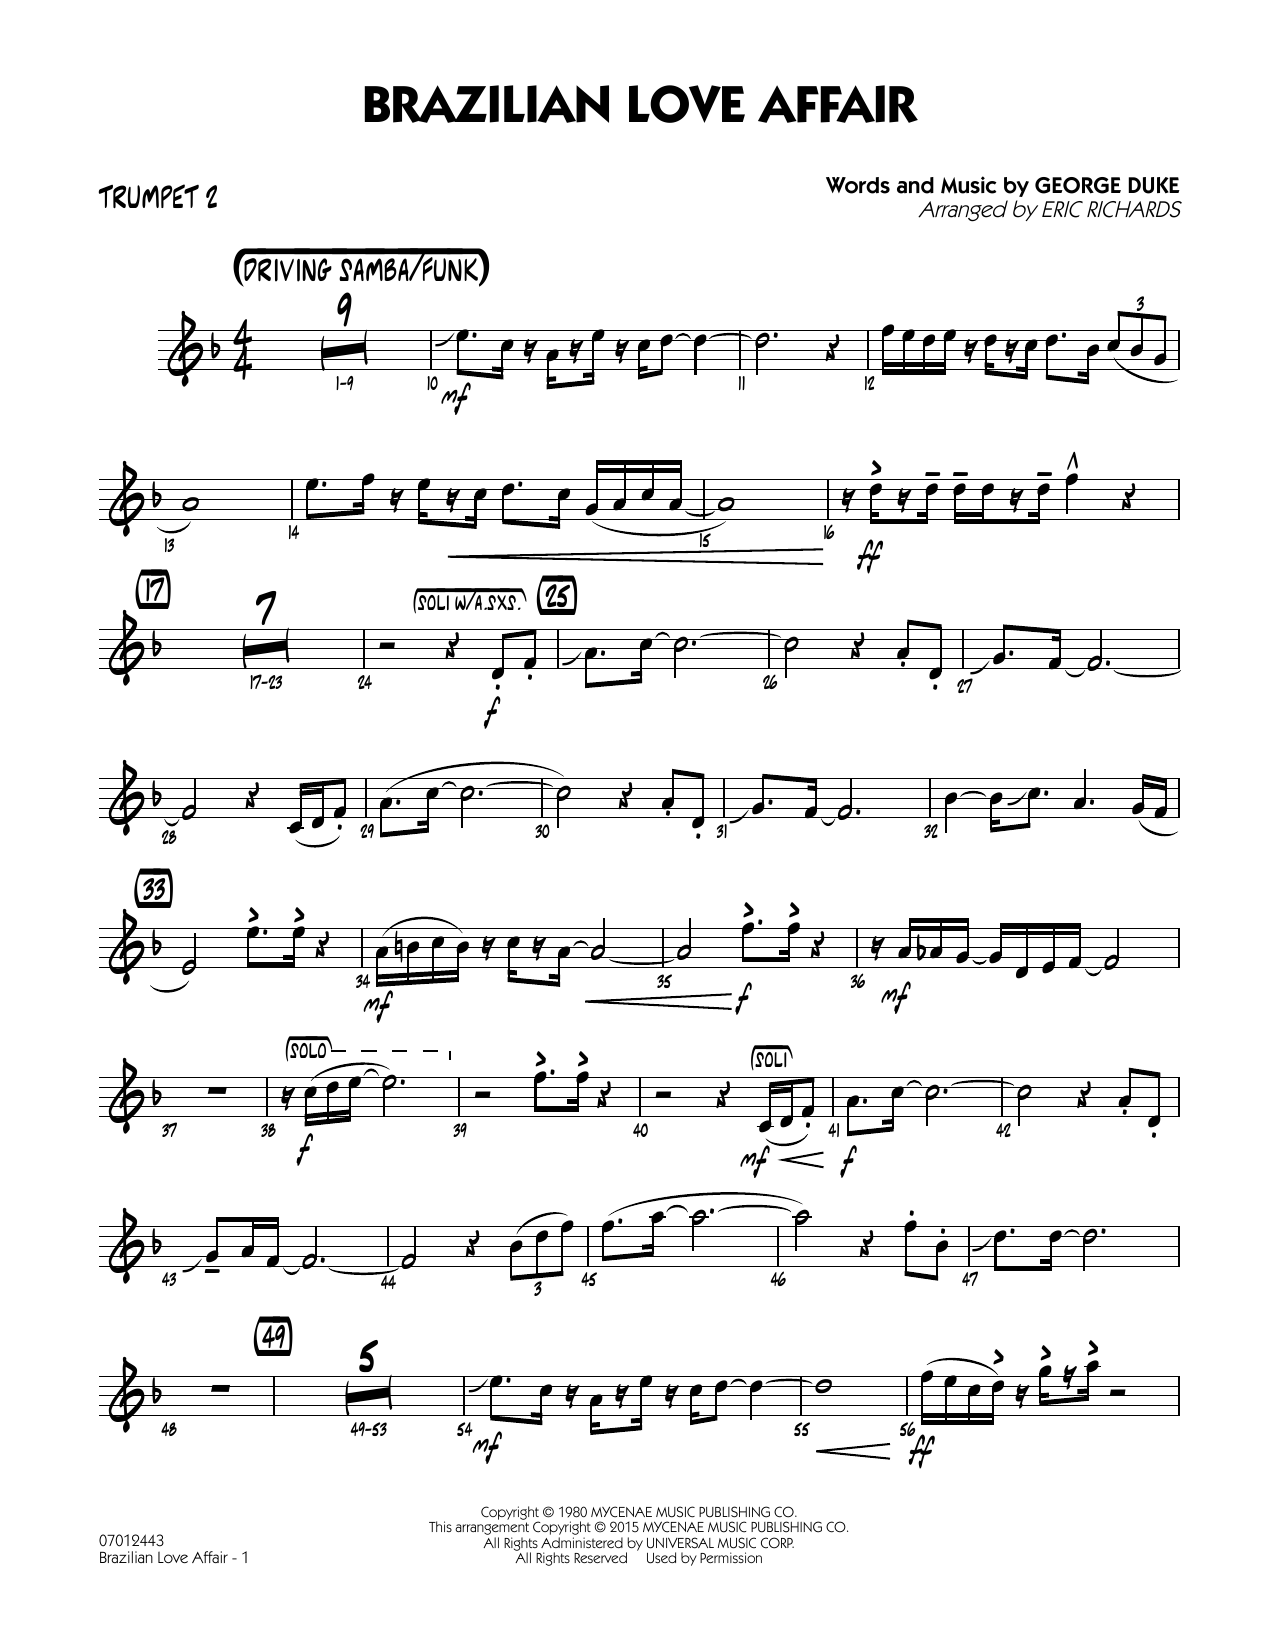 Eric Richards Brazilian Love Affair - Trumpet 2 sheet music notes and chords. Download Printable PDF.